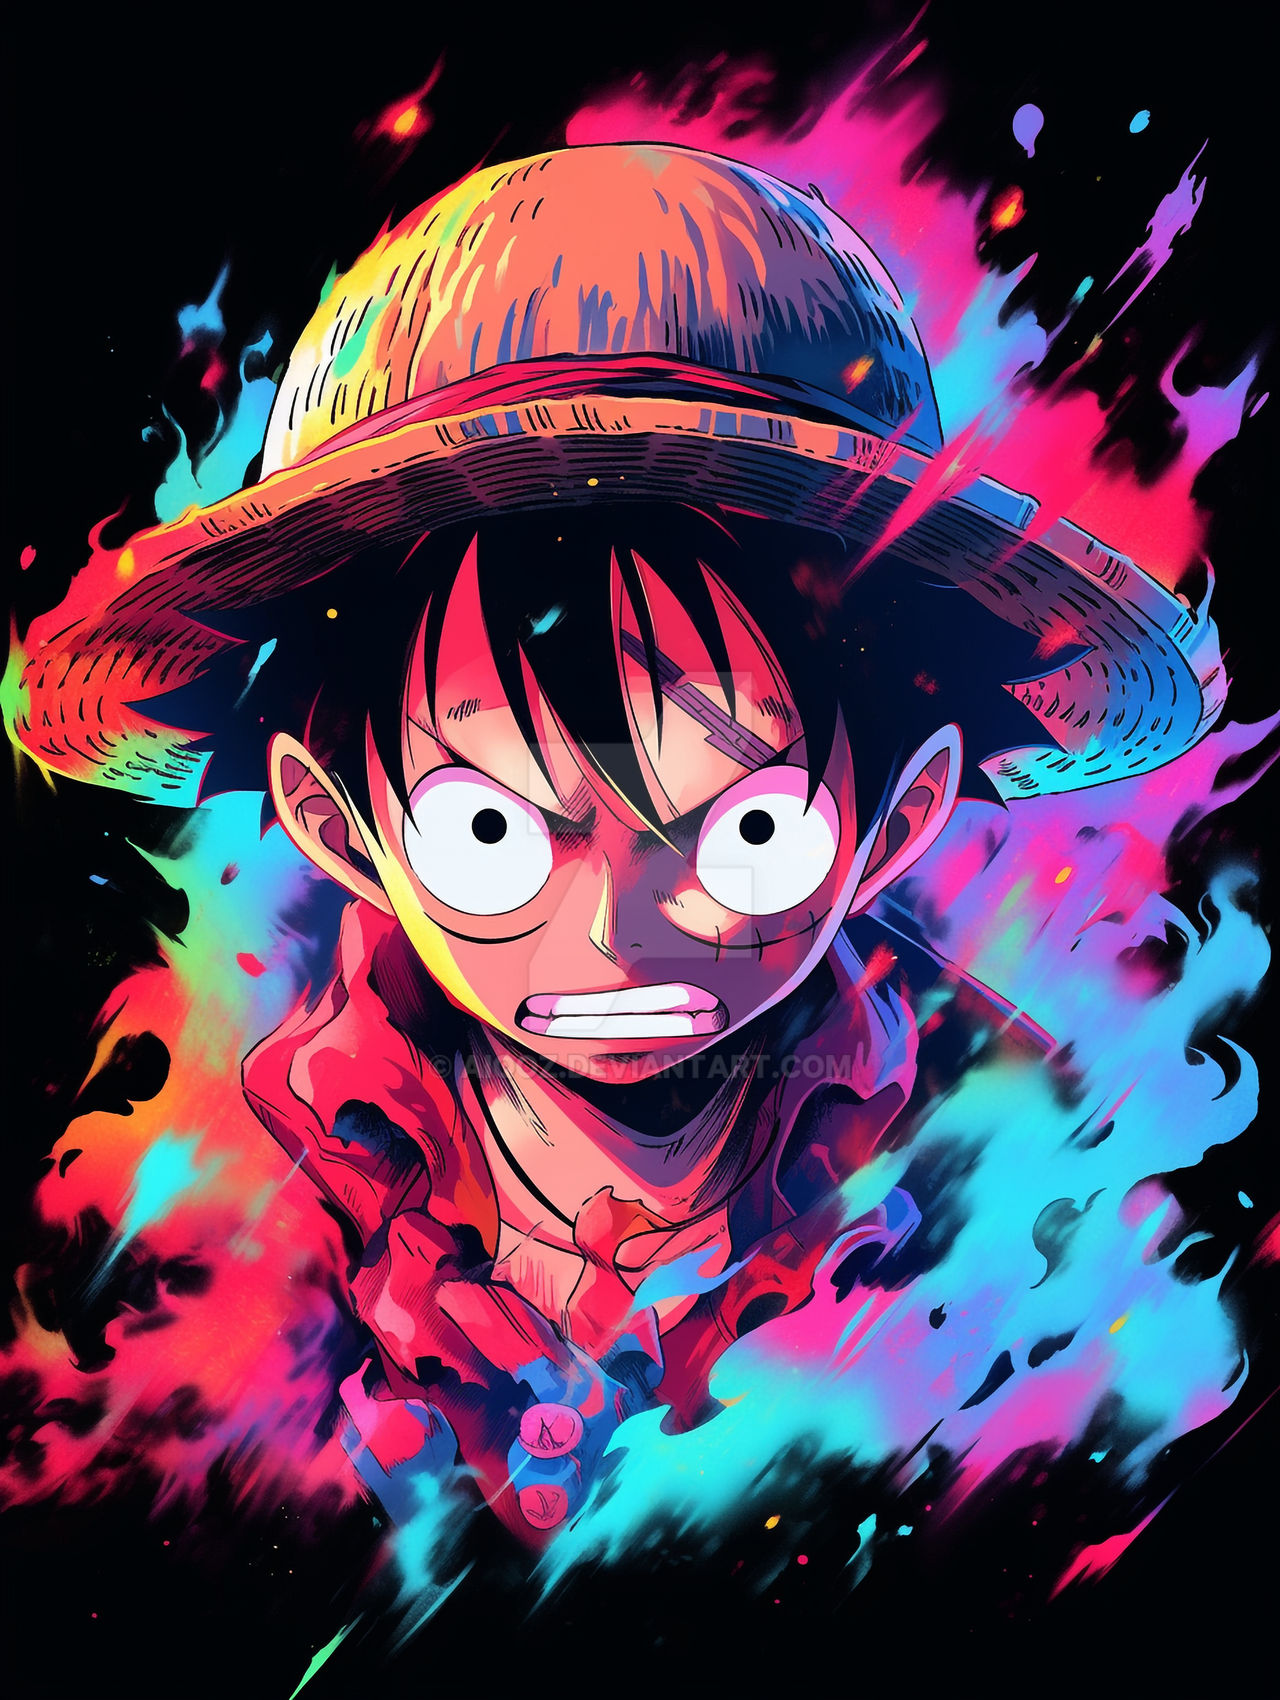 Monkey D. Luffy - One Piece by Aiqoz on DeviantArt